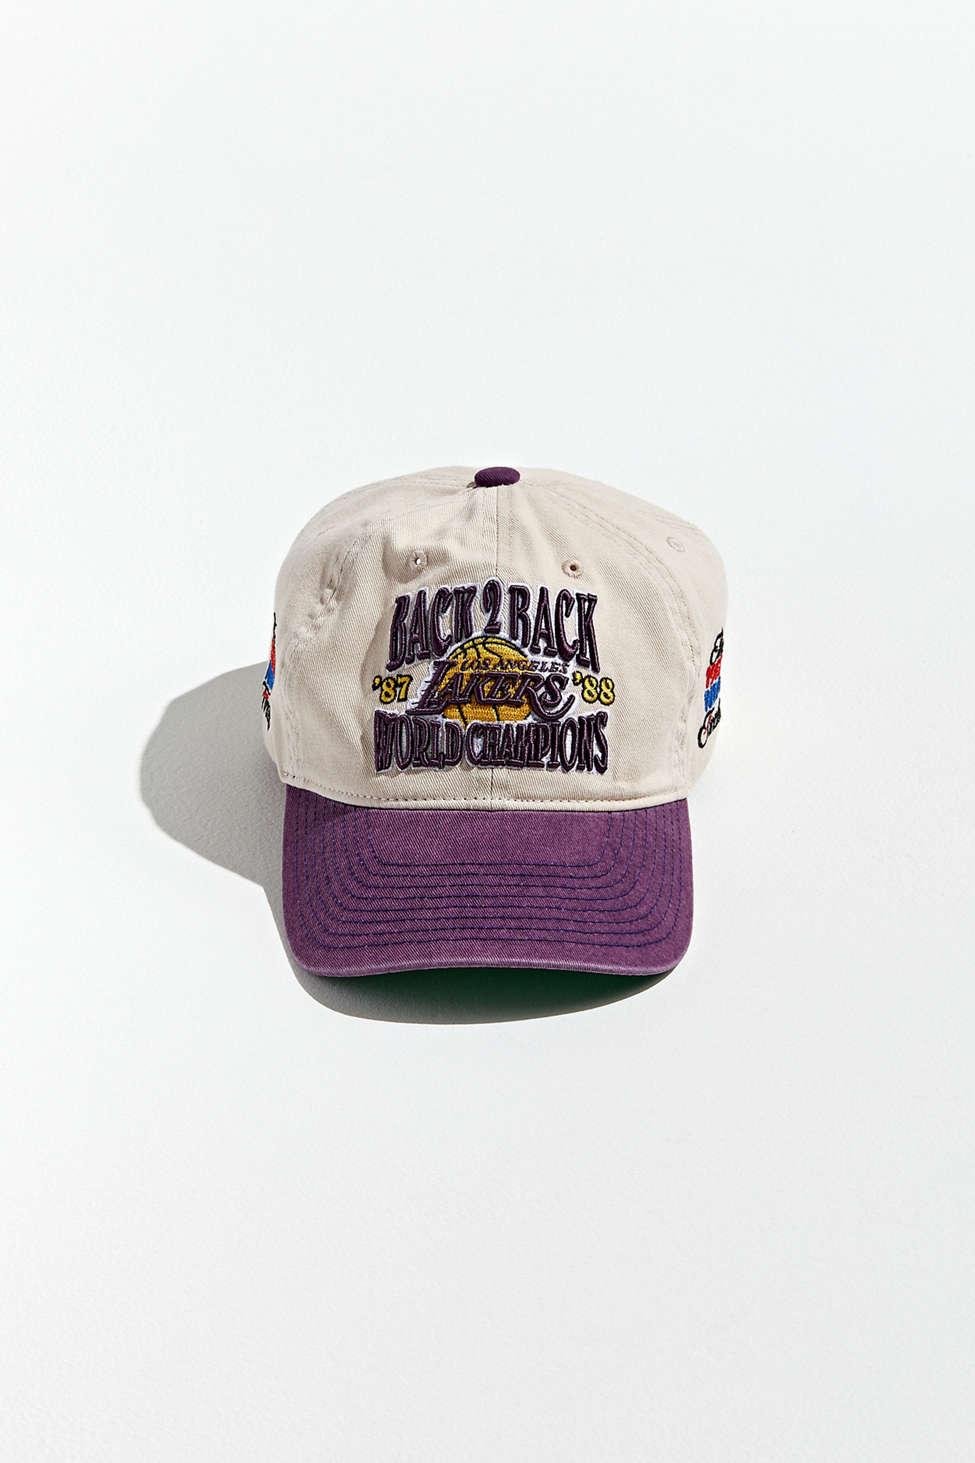 MITCHELL & NESS LAKERS BACK 2 BACK DAD HAT - 8586